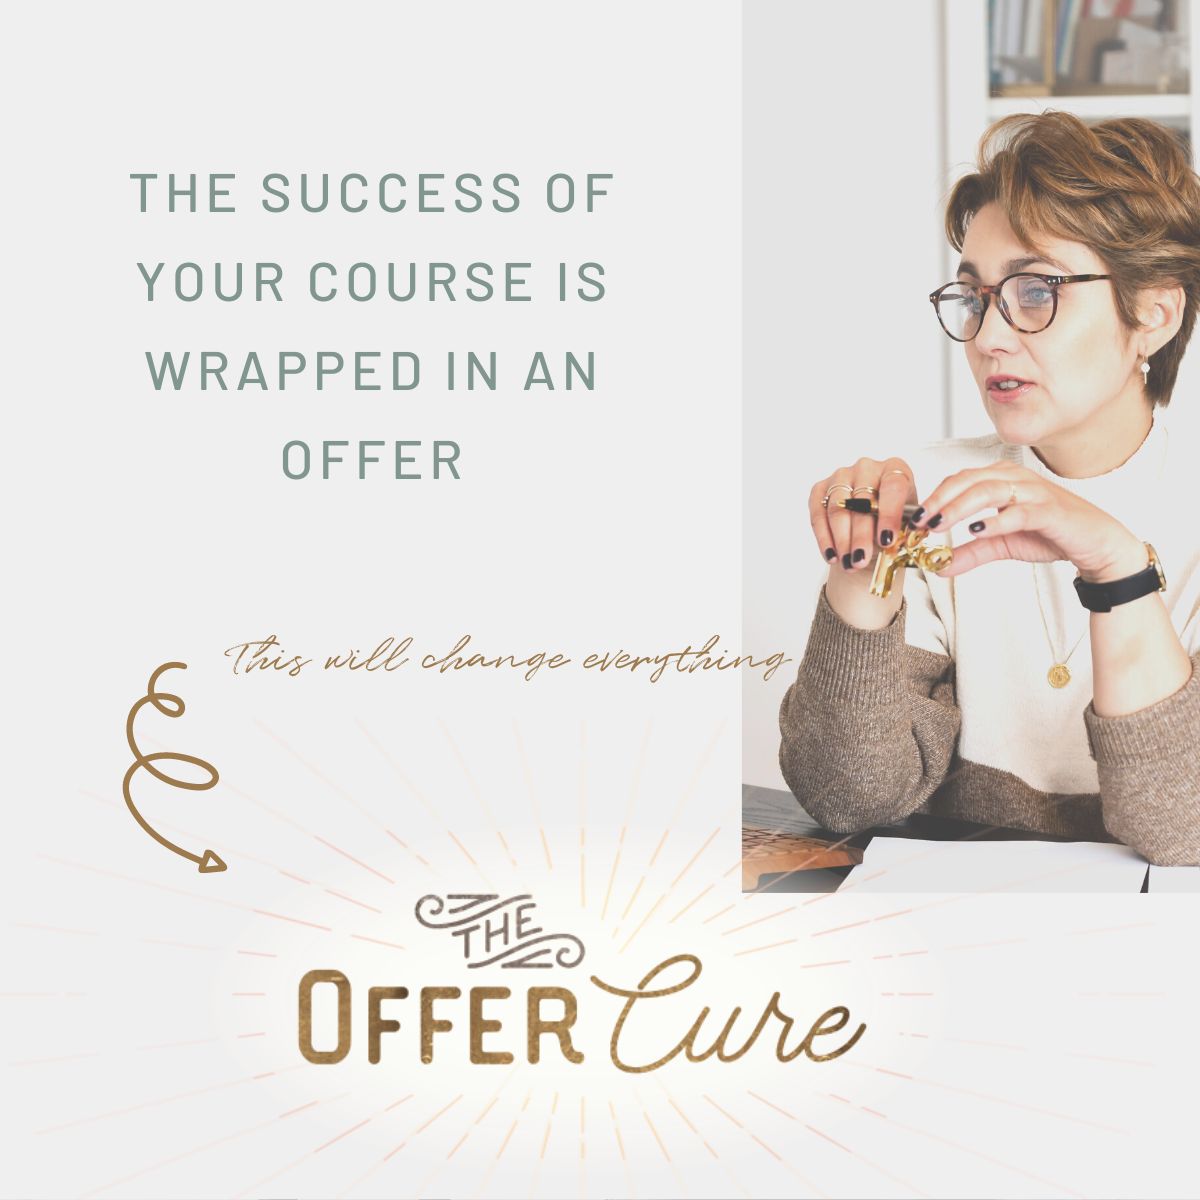 Offer Cure Increase the chance of success with your course.